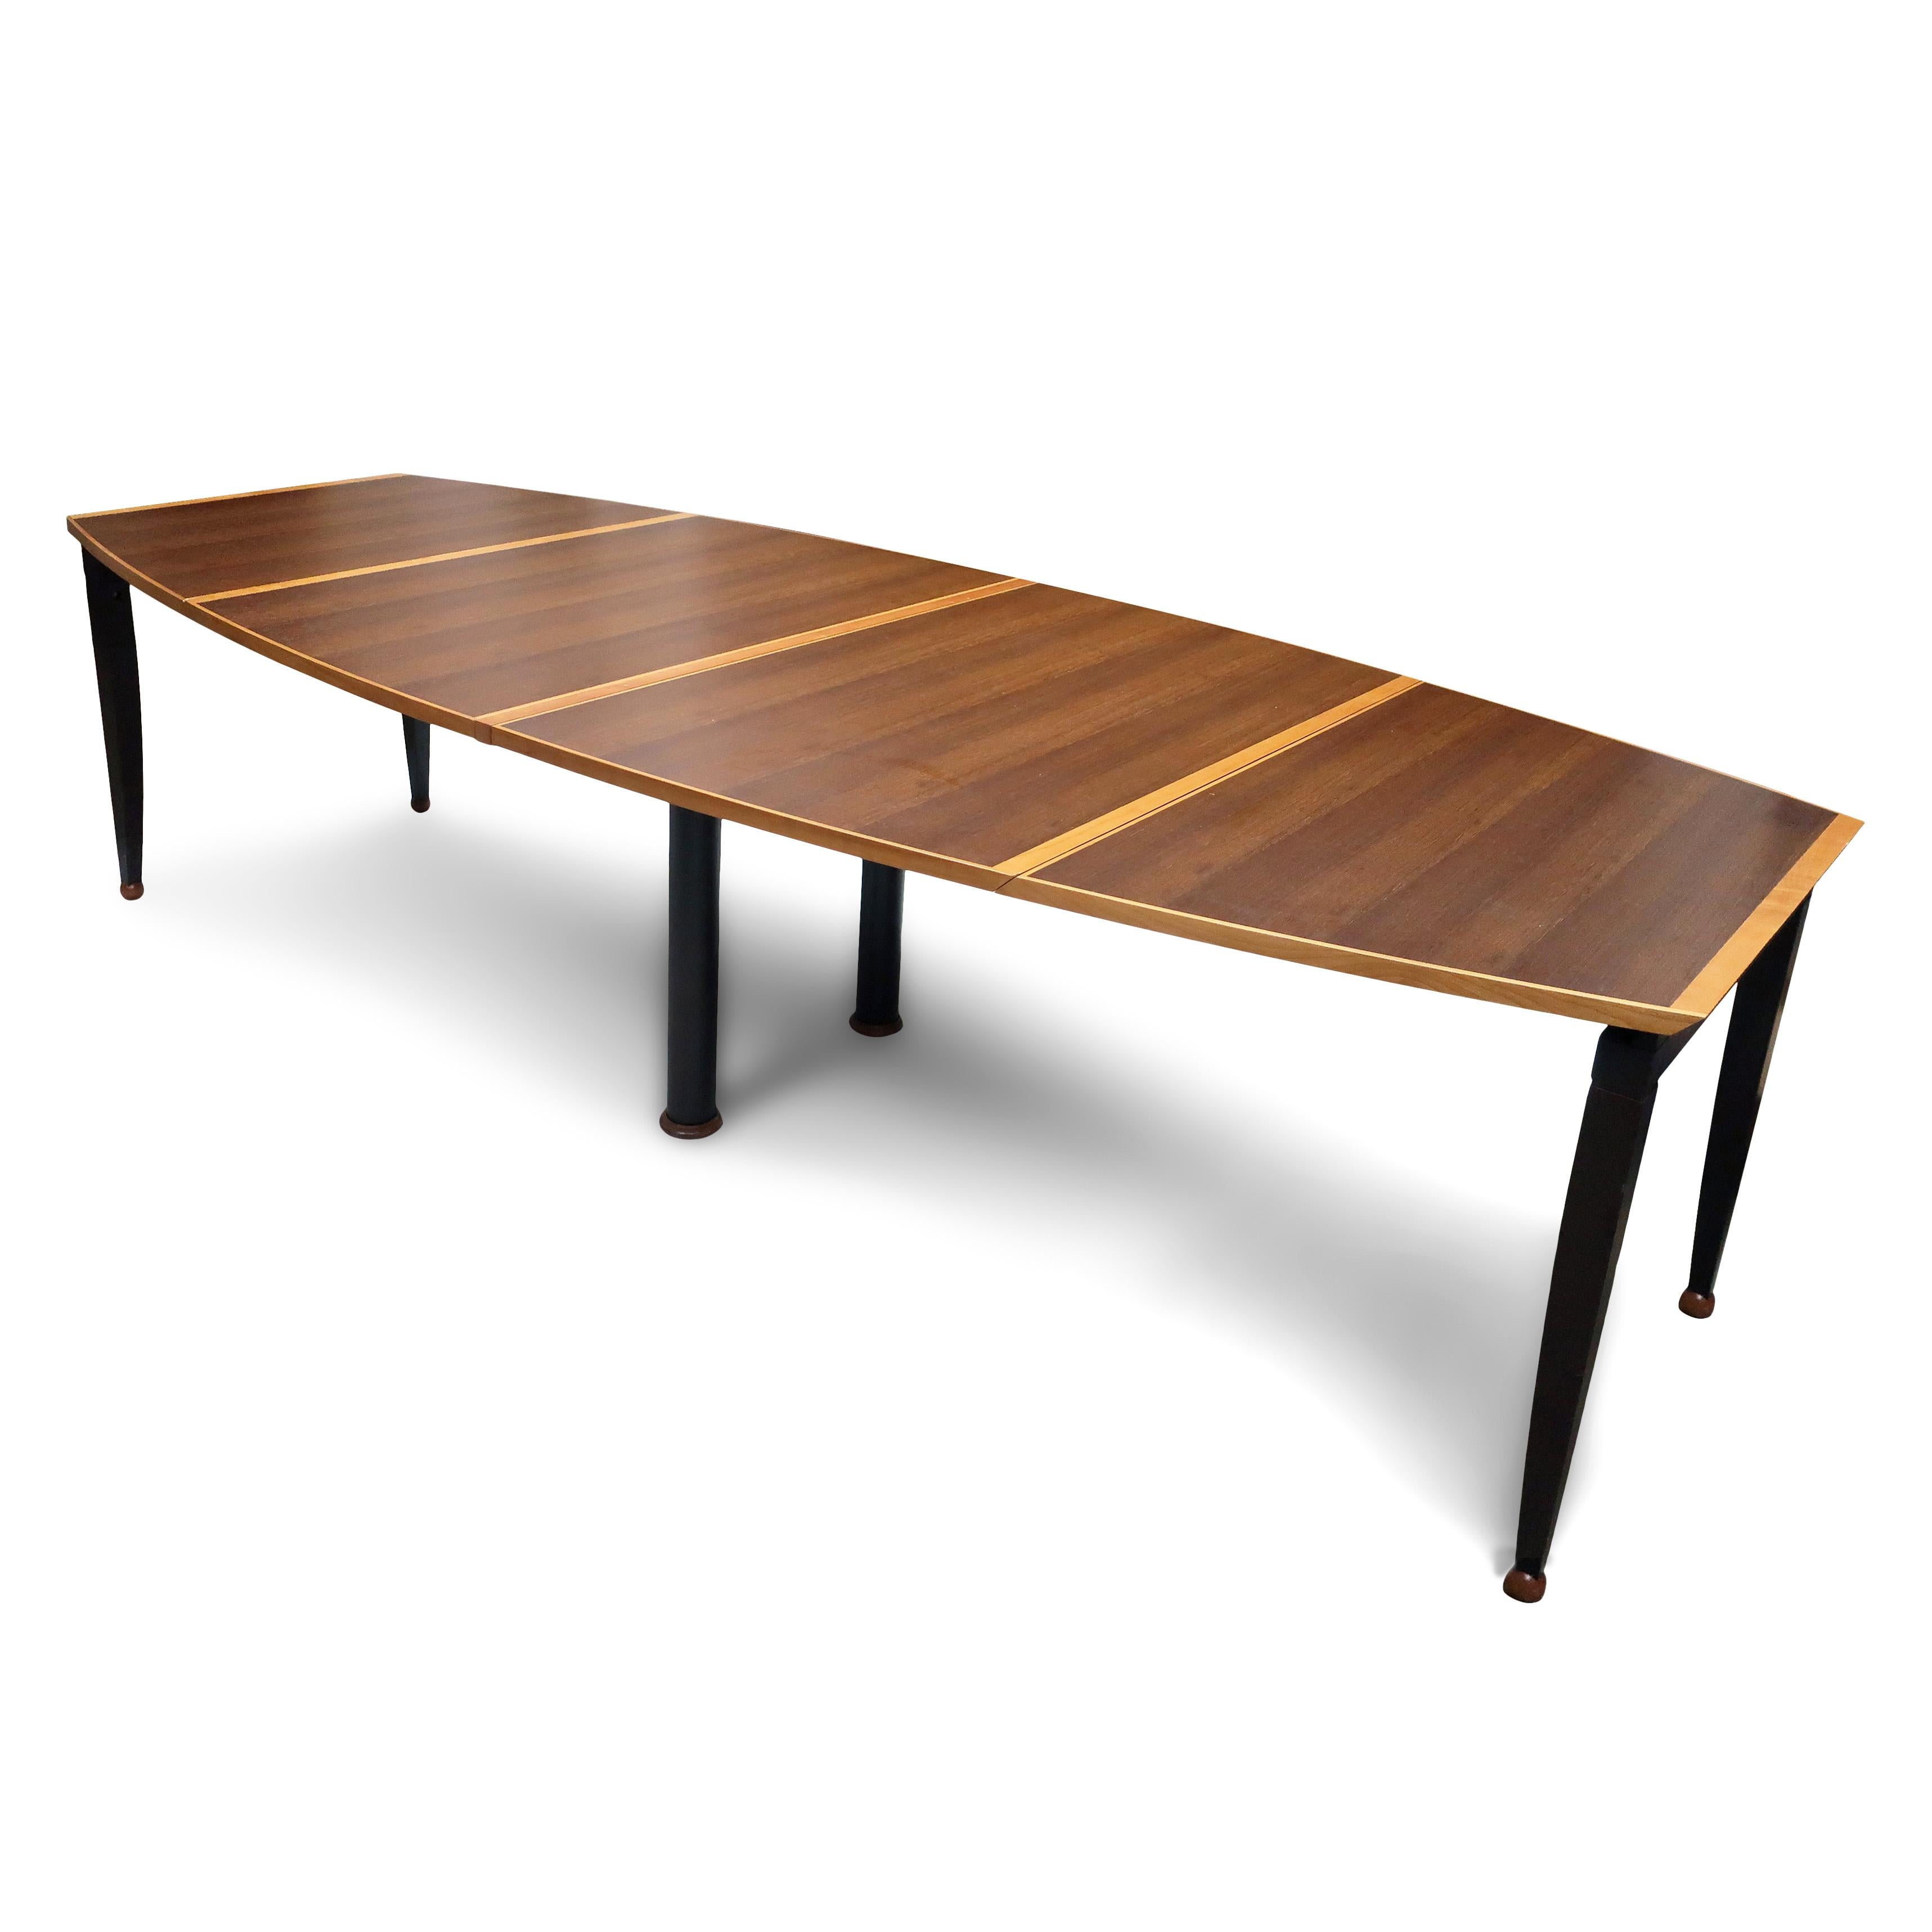 Wenge Tabula Magna Dining Table by Oscar Tosquets Blanca for Driade Aleph, '1991' For Sale